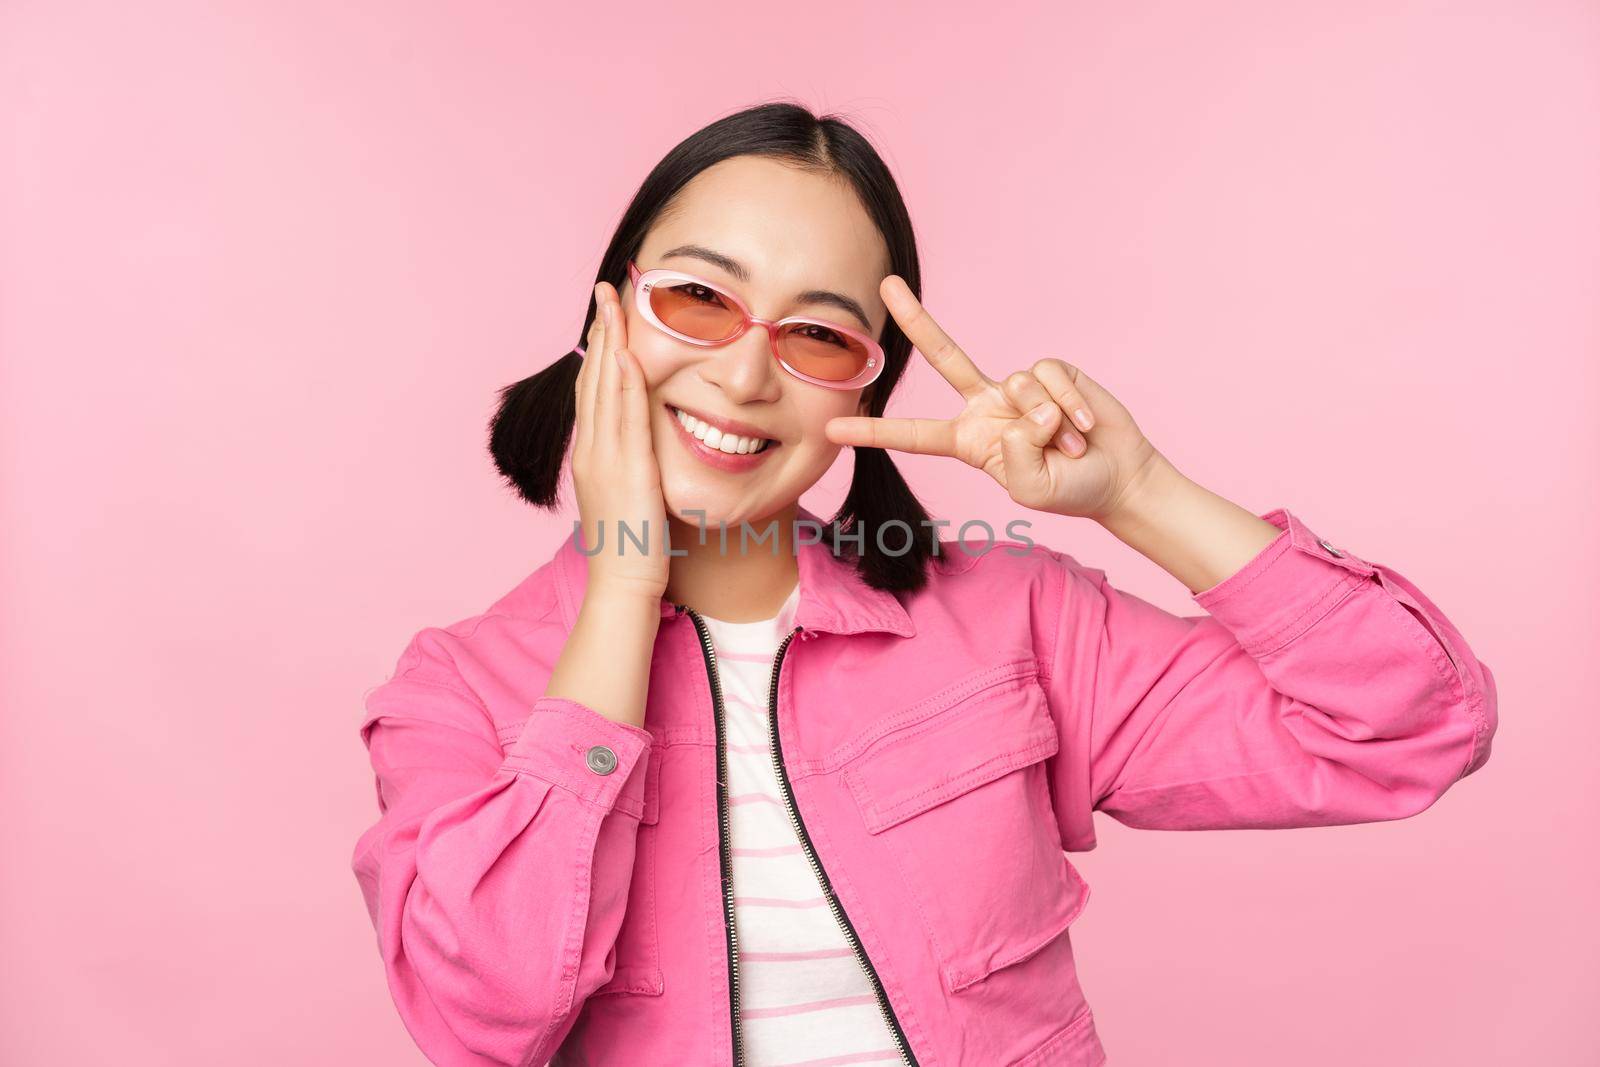 Portrait of kawaii asian girl in sunglasses, showing peace, v-sign near eye and smiles cute at camera, posing in trendy clothes against pink background.